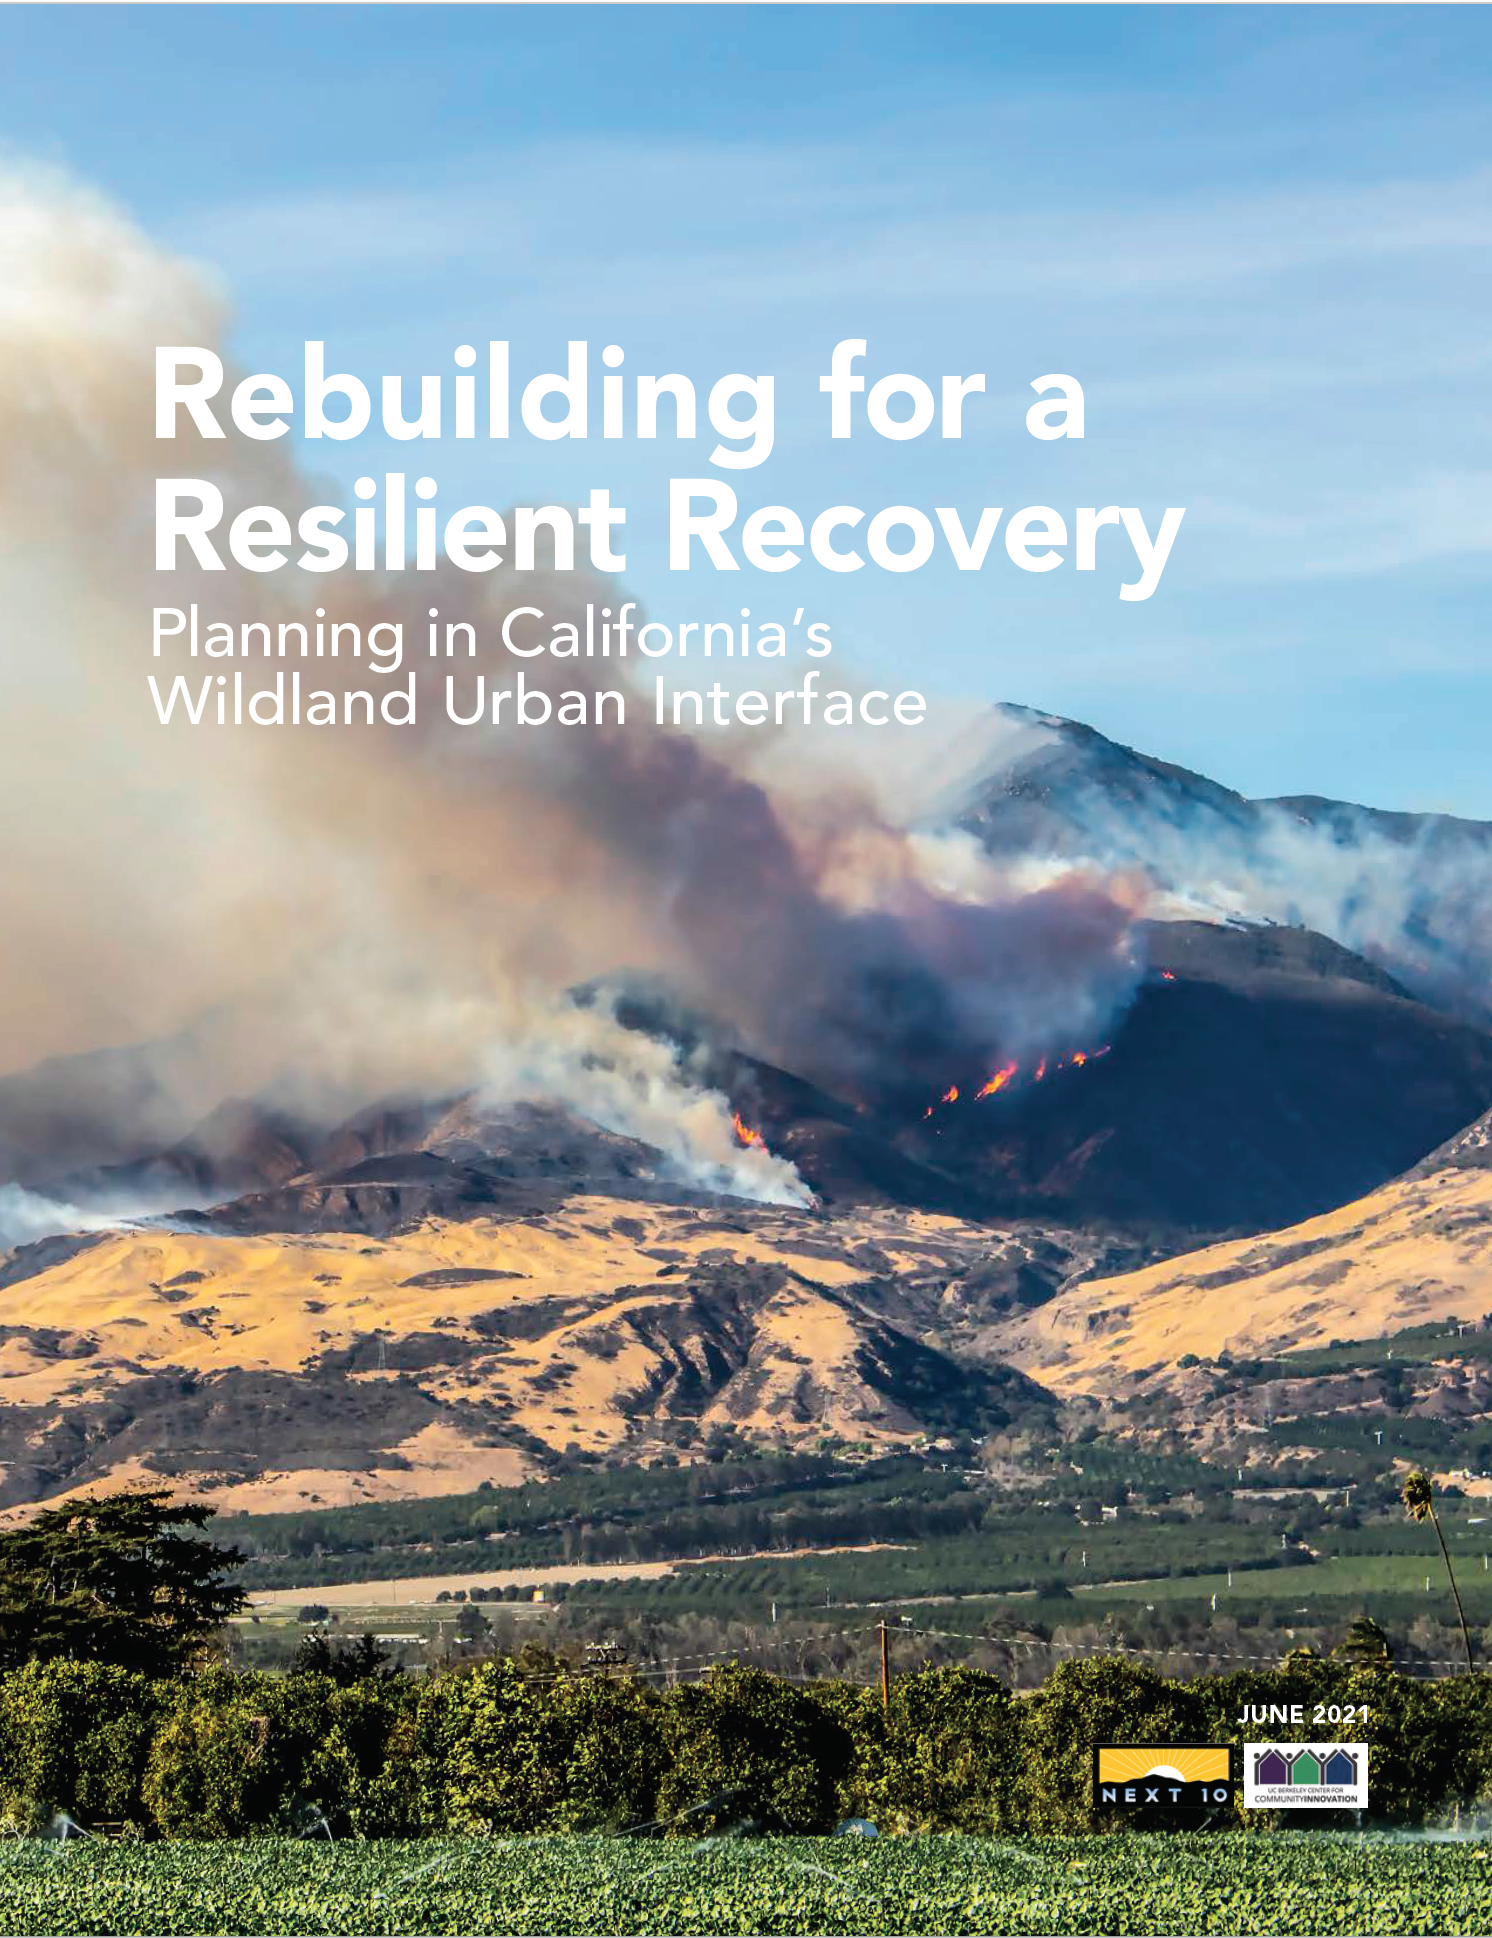 Rebuilding for a Resilient Recovery: Planning in California's Wildland Urban Interface